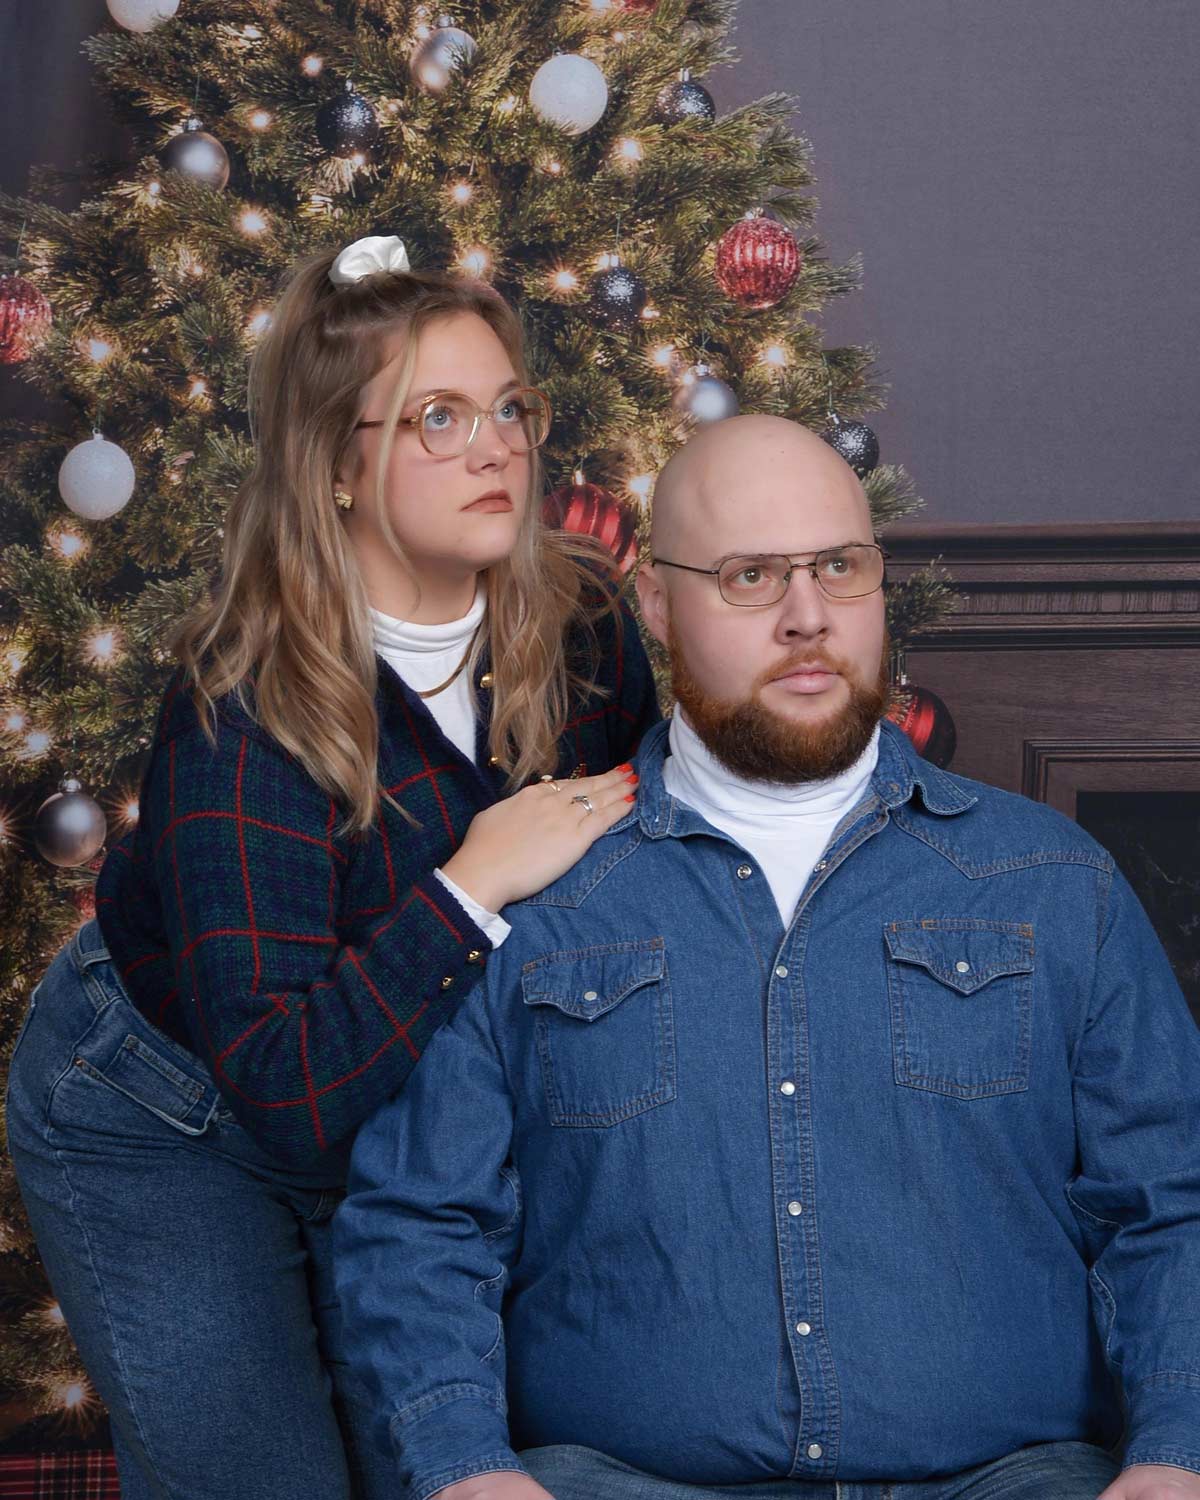 My wife and I had our Christmas card picture taken today